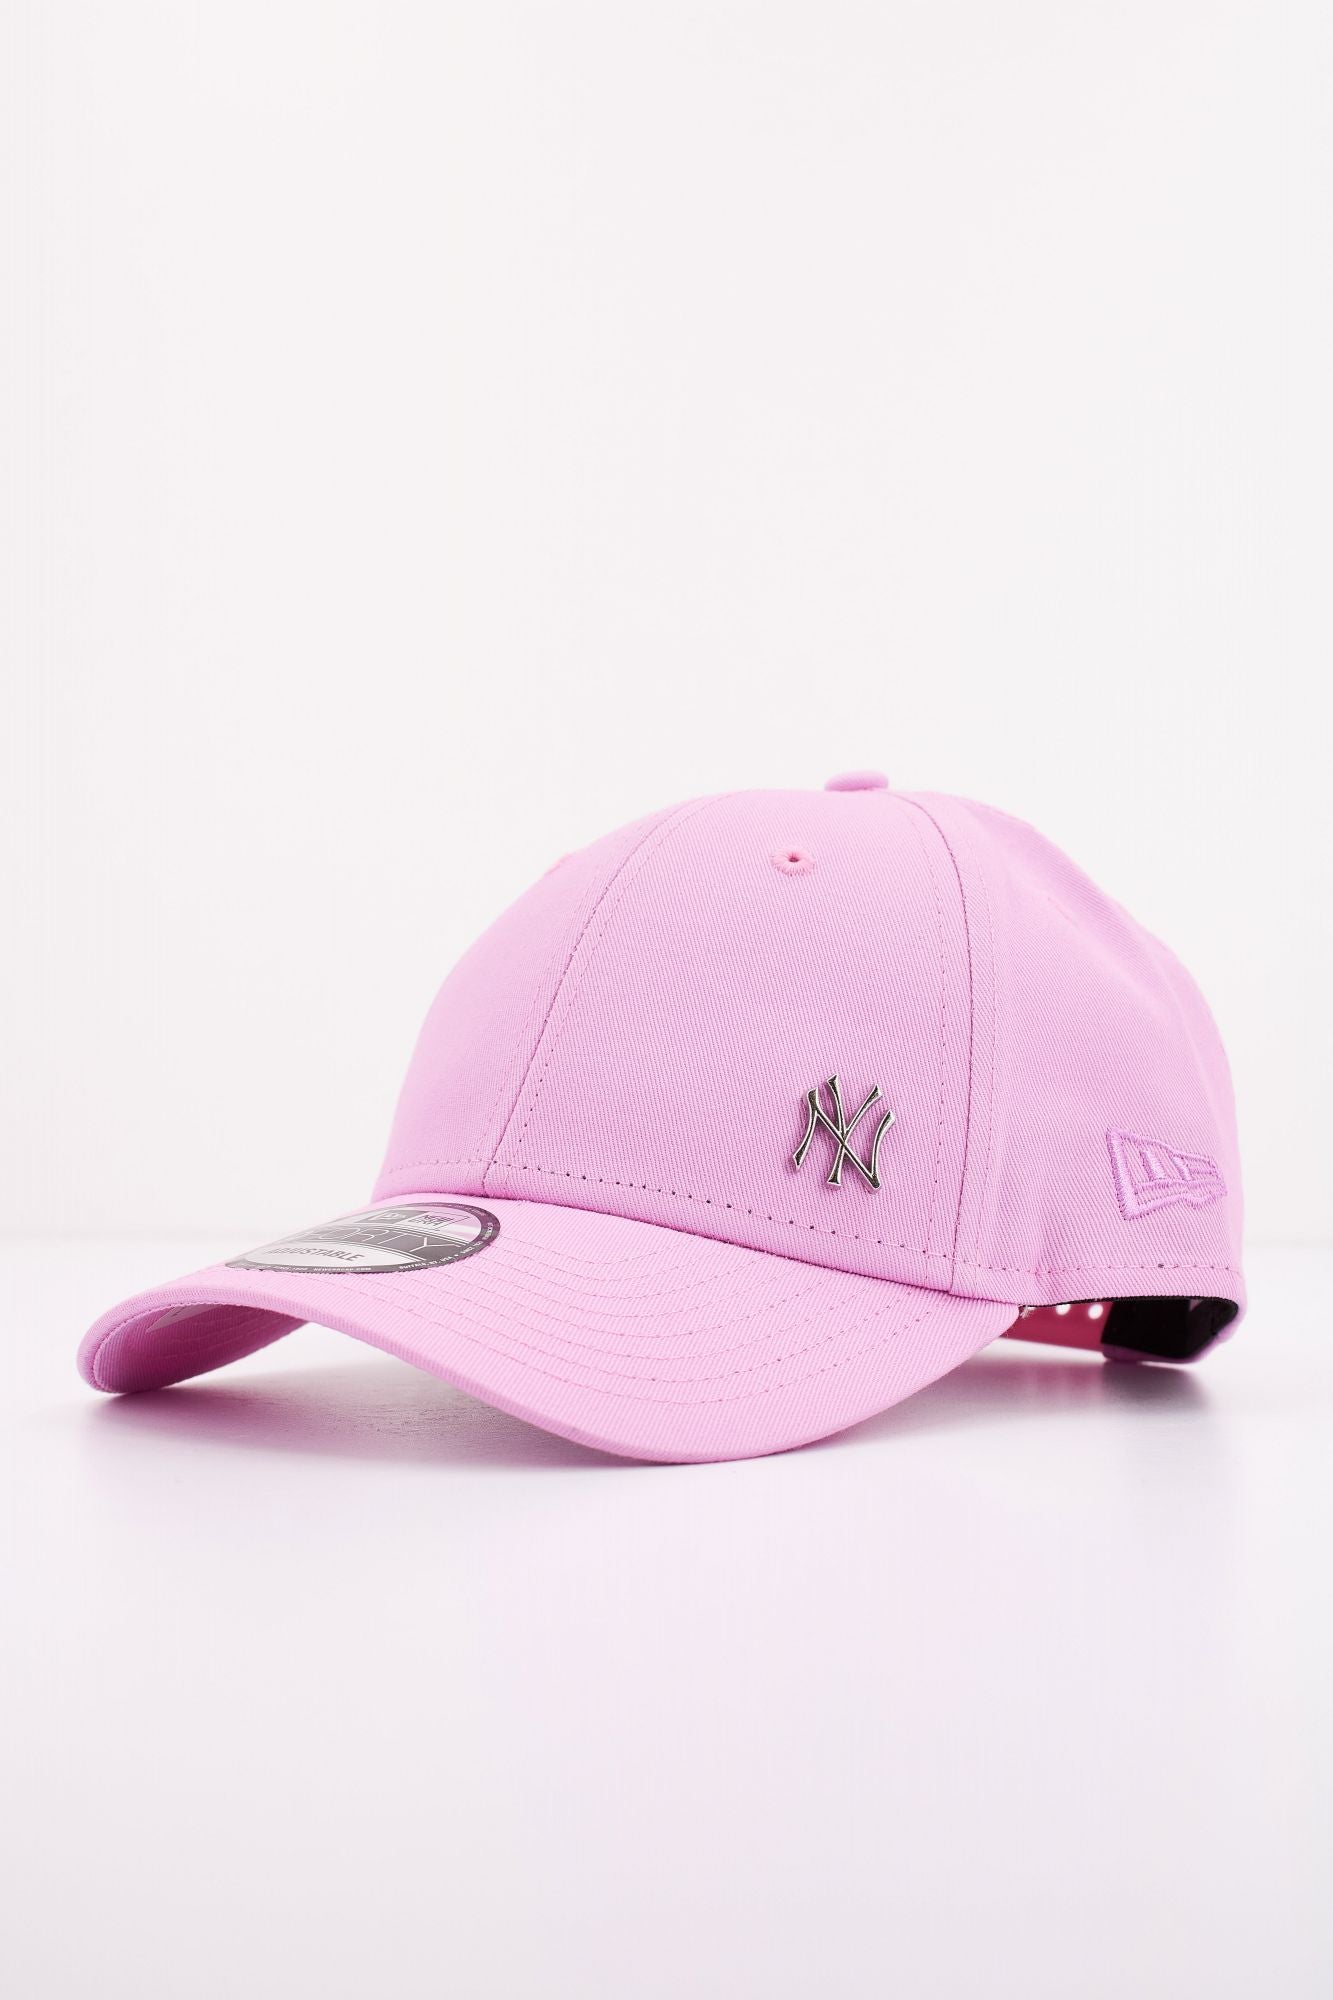 NEW ERA FLAWLESS 9FORTY en color ROSA (2)